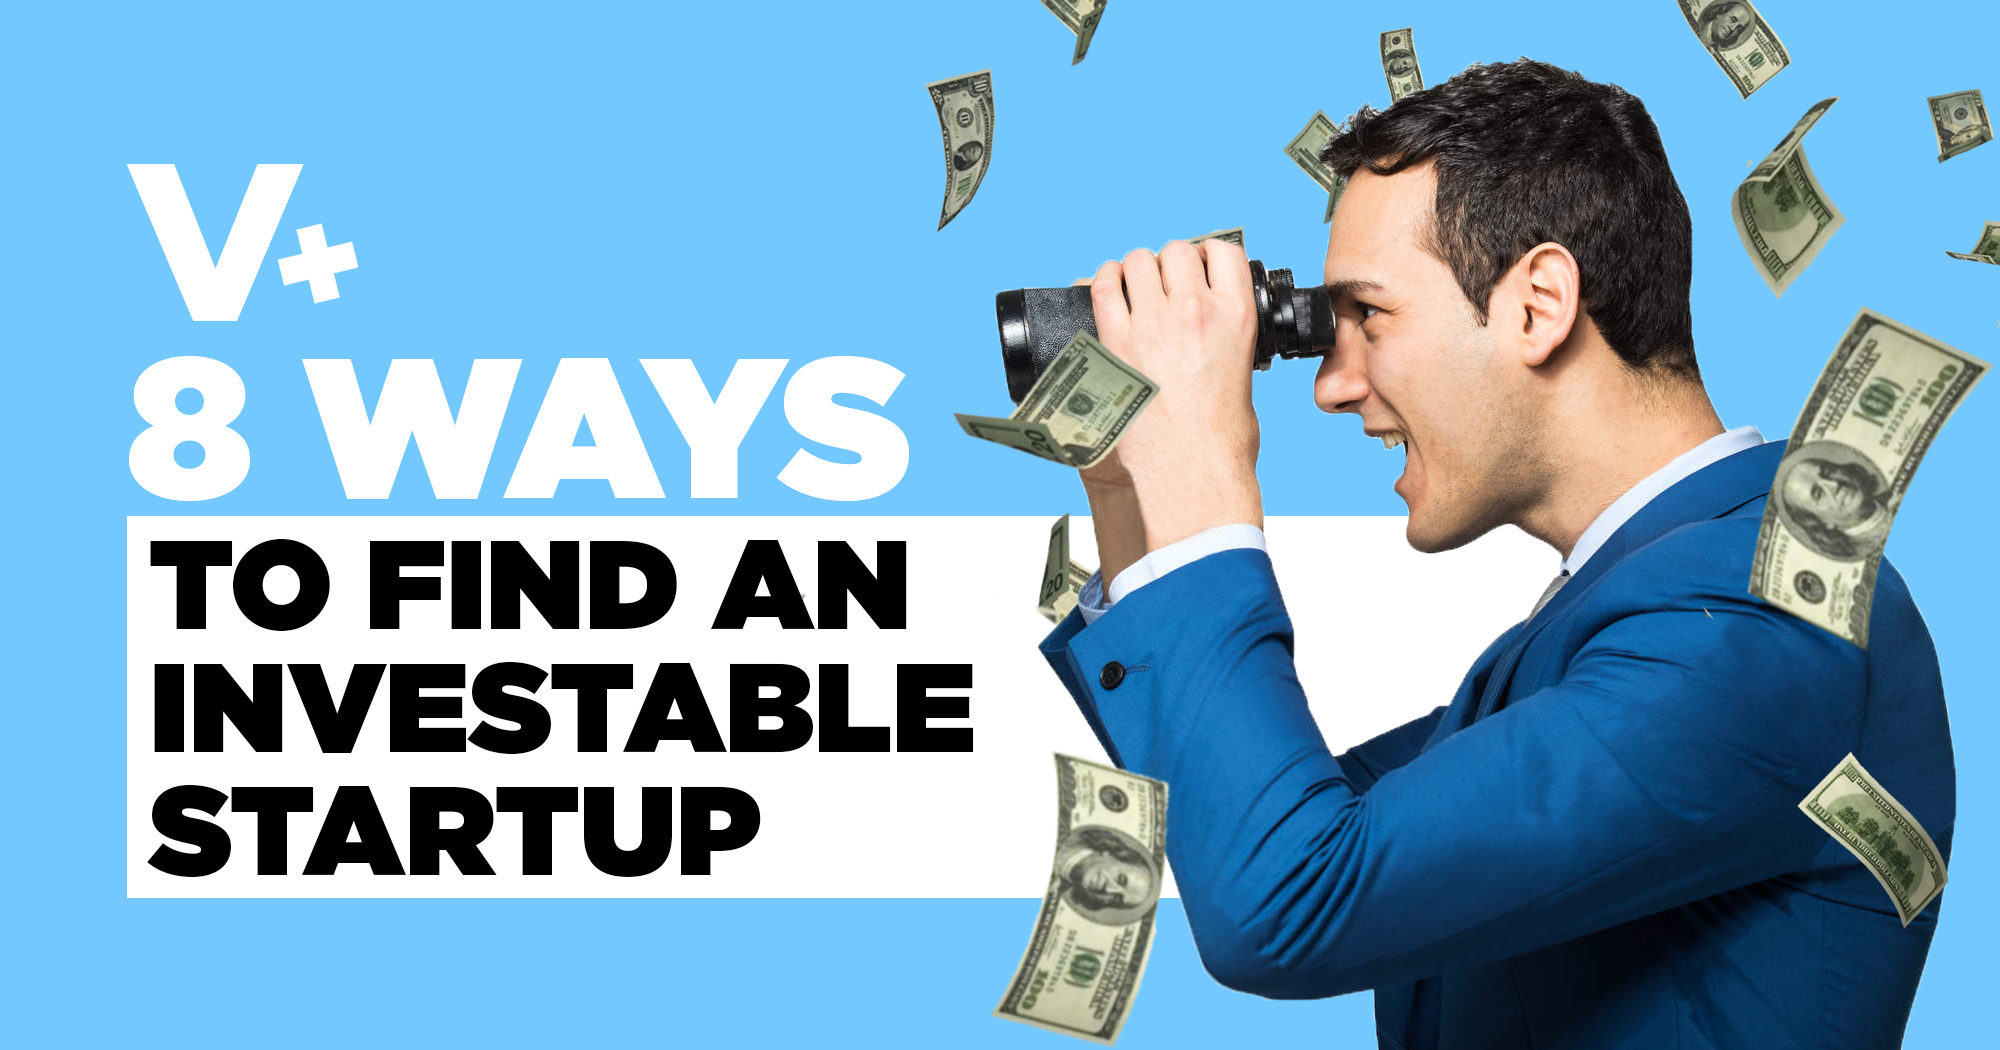 8 Ways on How to Find Startups to Invest In